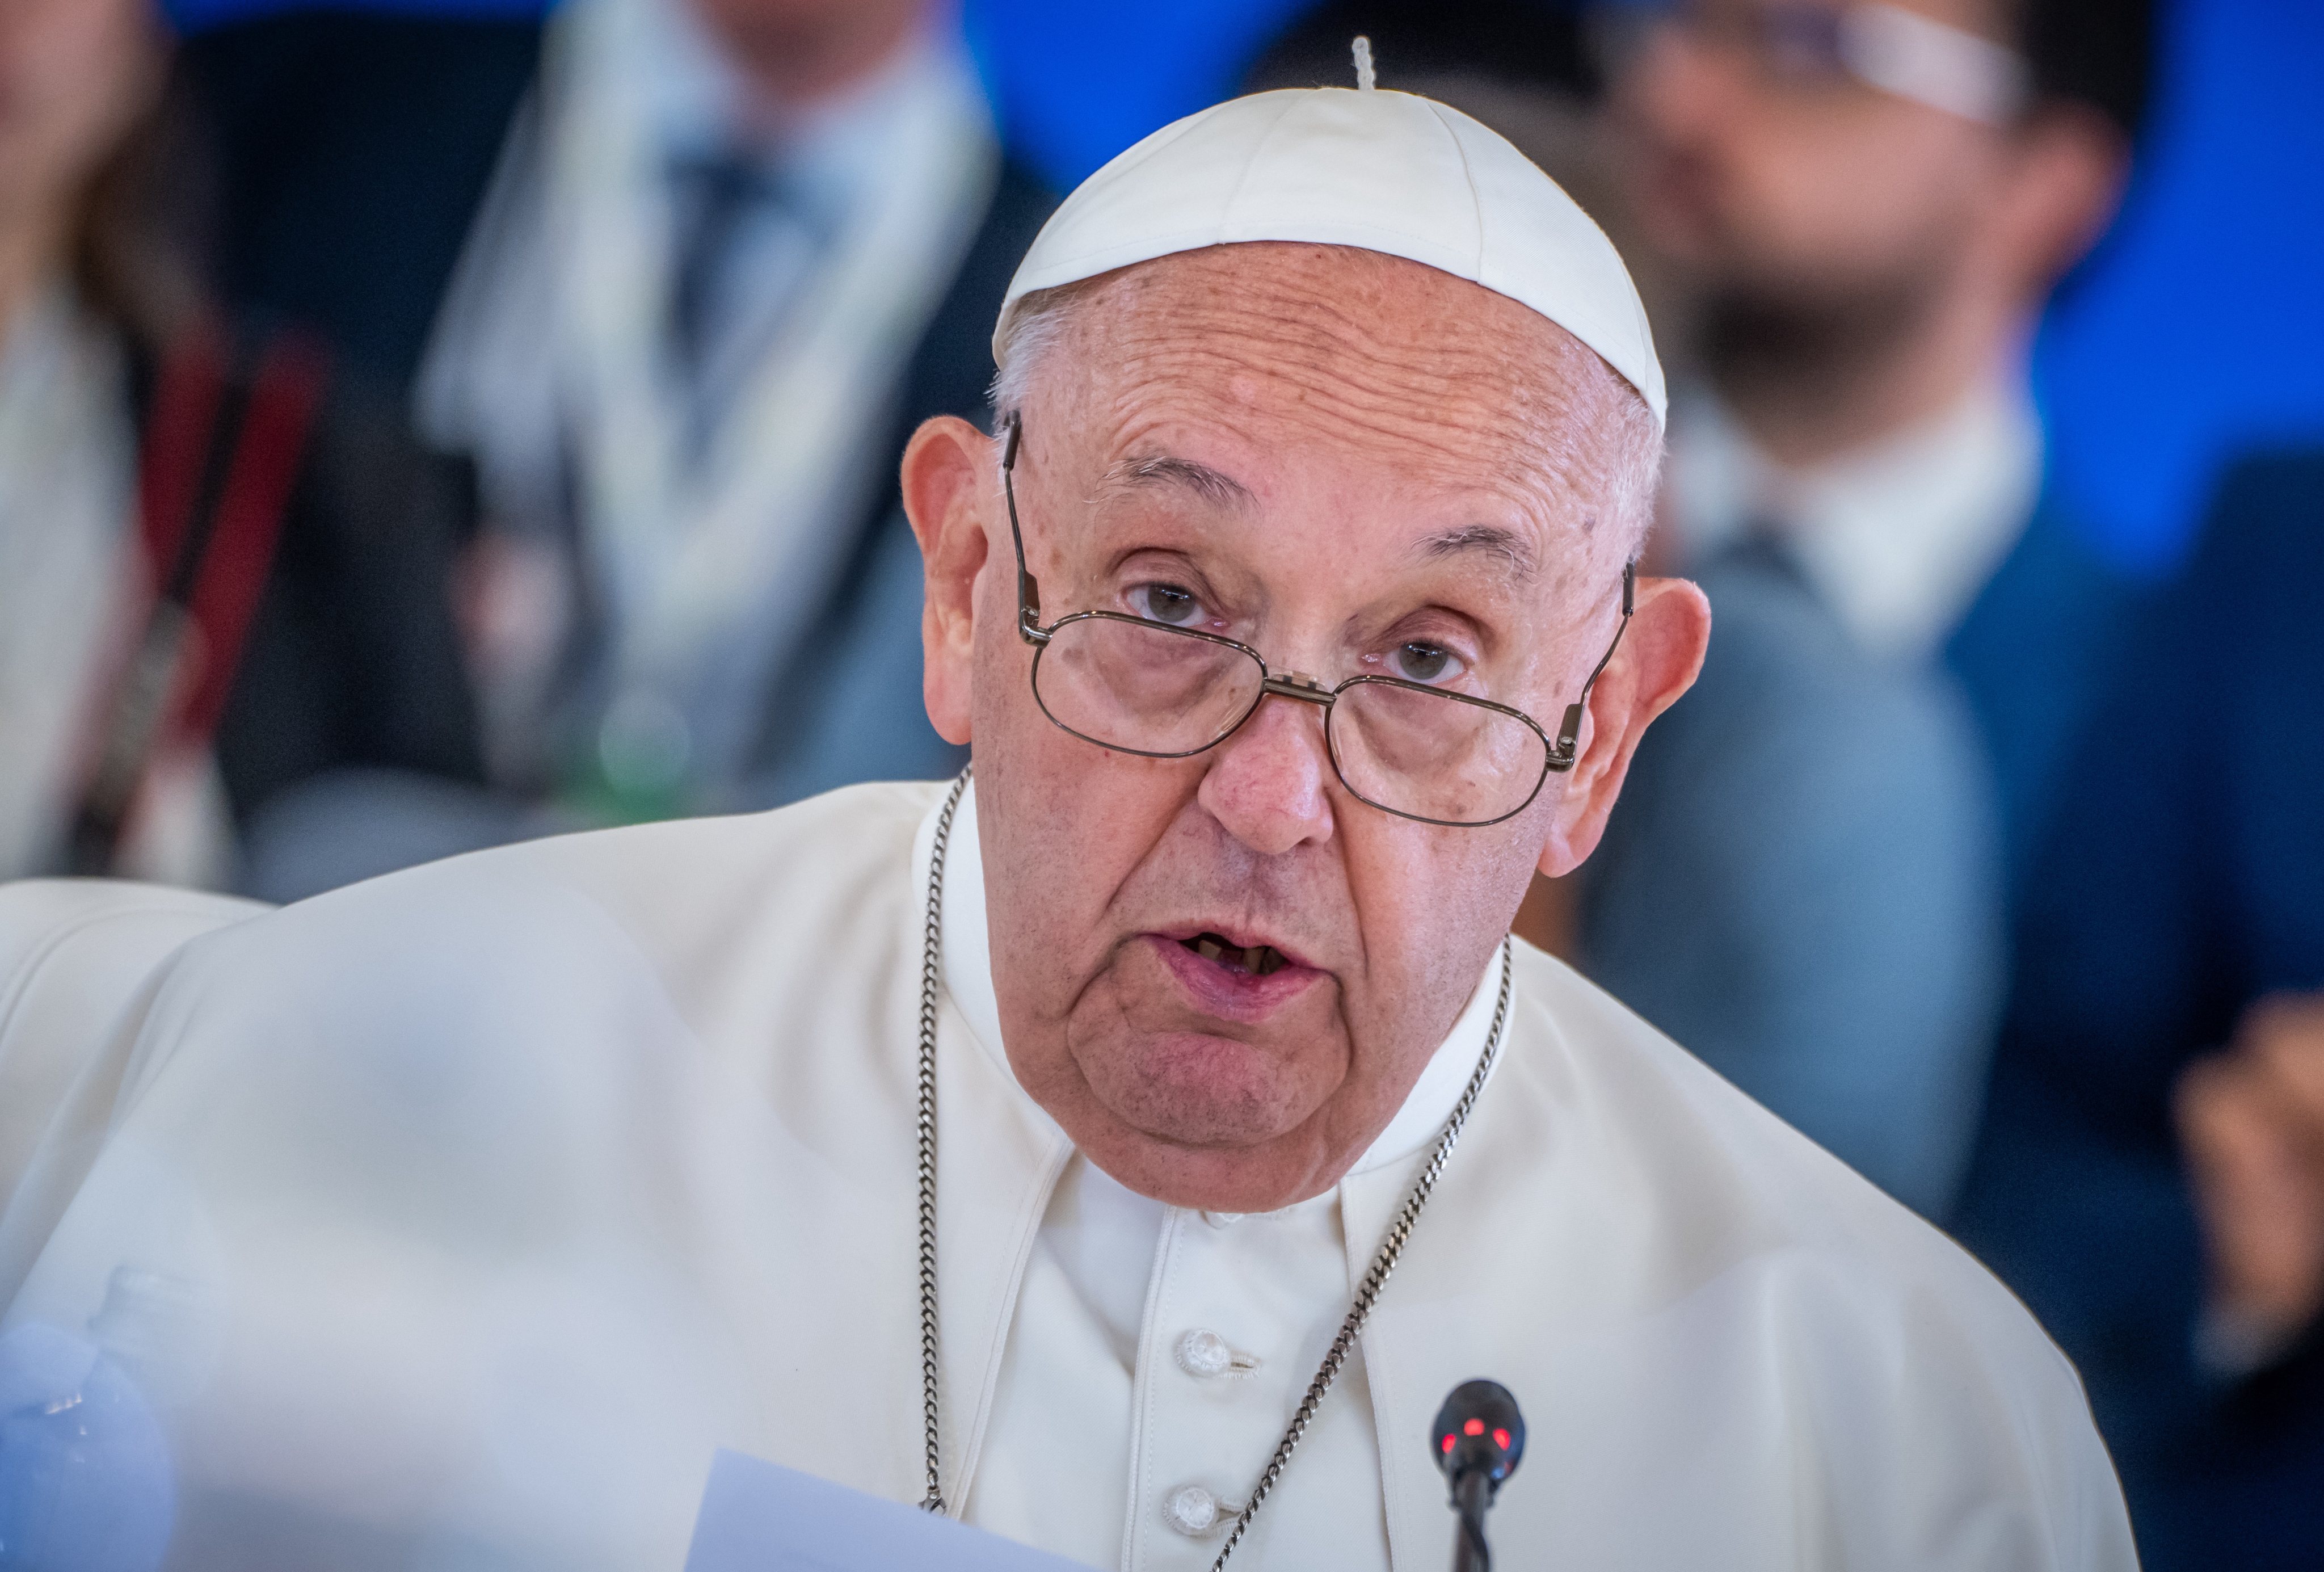 Pope Francis speaks during the G7 leaders’ summit at the Borgo Egnazia resort in Italy on Friday. Photo: dpa